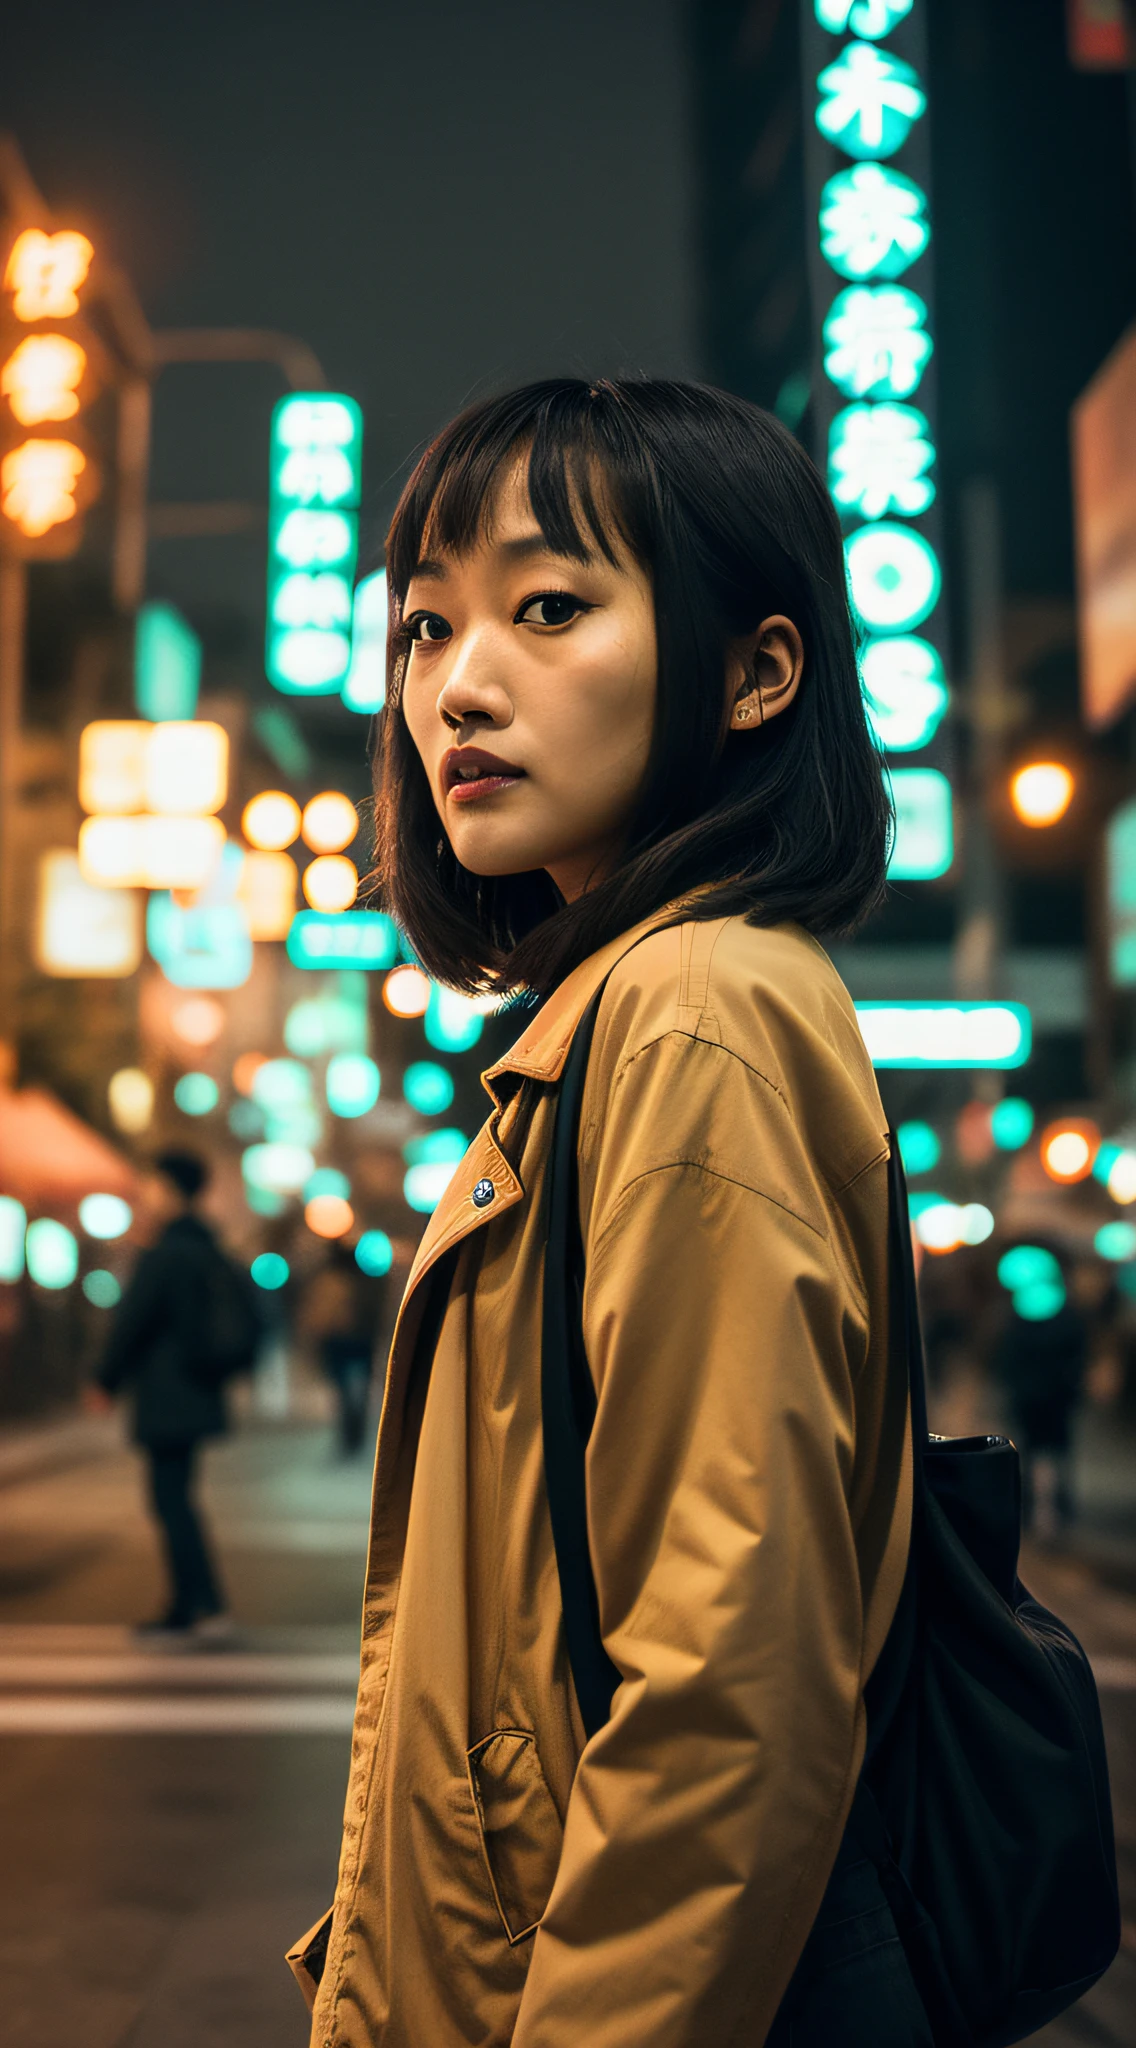 Selfie, street shooting, lens blur, Zhou Xun, cinematic sense, Guangzhou streets, hyper-realism, movie lighting effects, loneliness of people coming and going